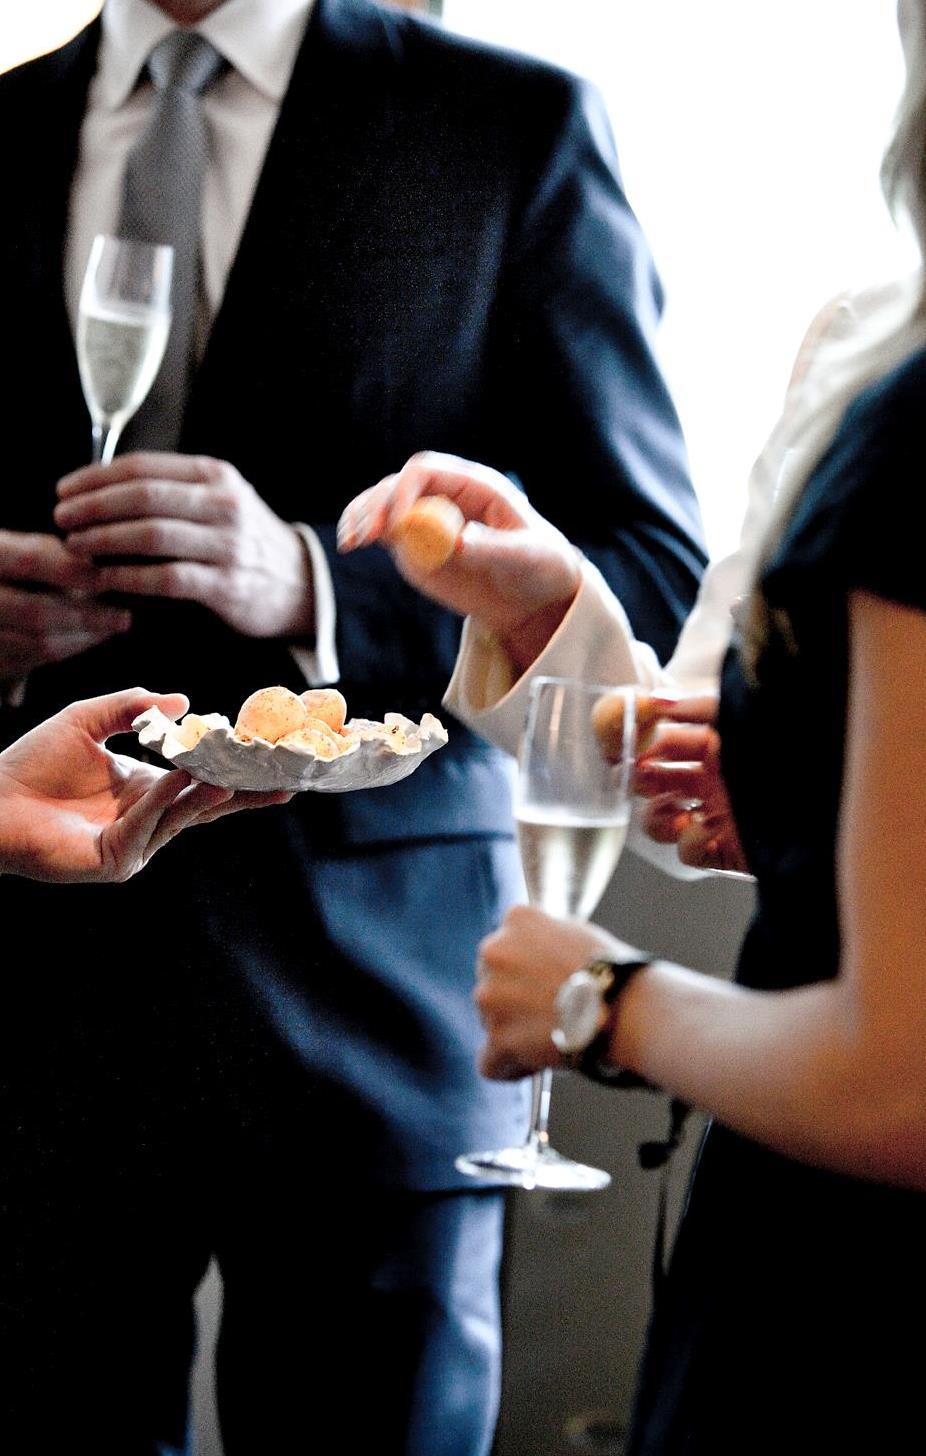 PRE-DINNER RECEPTION - Champagne & Canapés - 30 pp 3 Canapés + 1 glass of Champagne Selection Alain Ducasse - Dom Pérignon Reception - 57 pp 3 Canapés + 1 glass of Dom Pérignon Champagne A LA CARTE